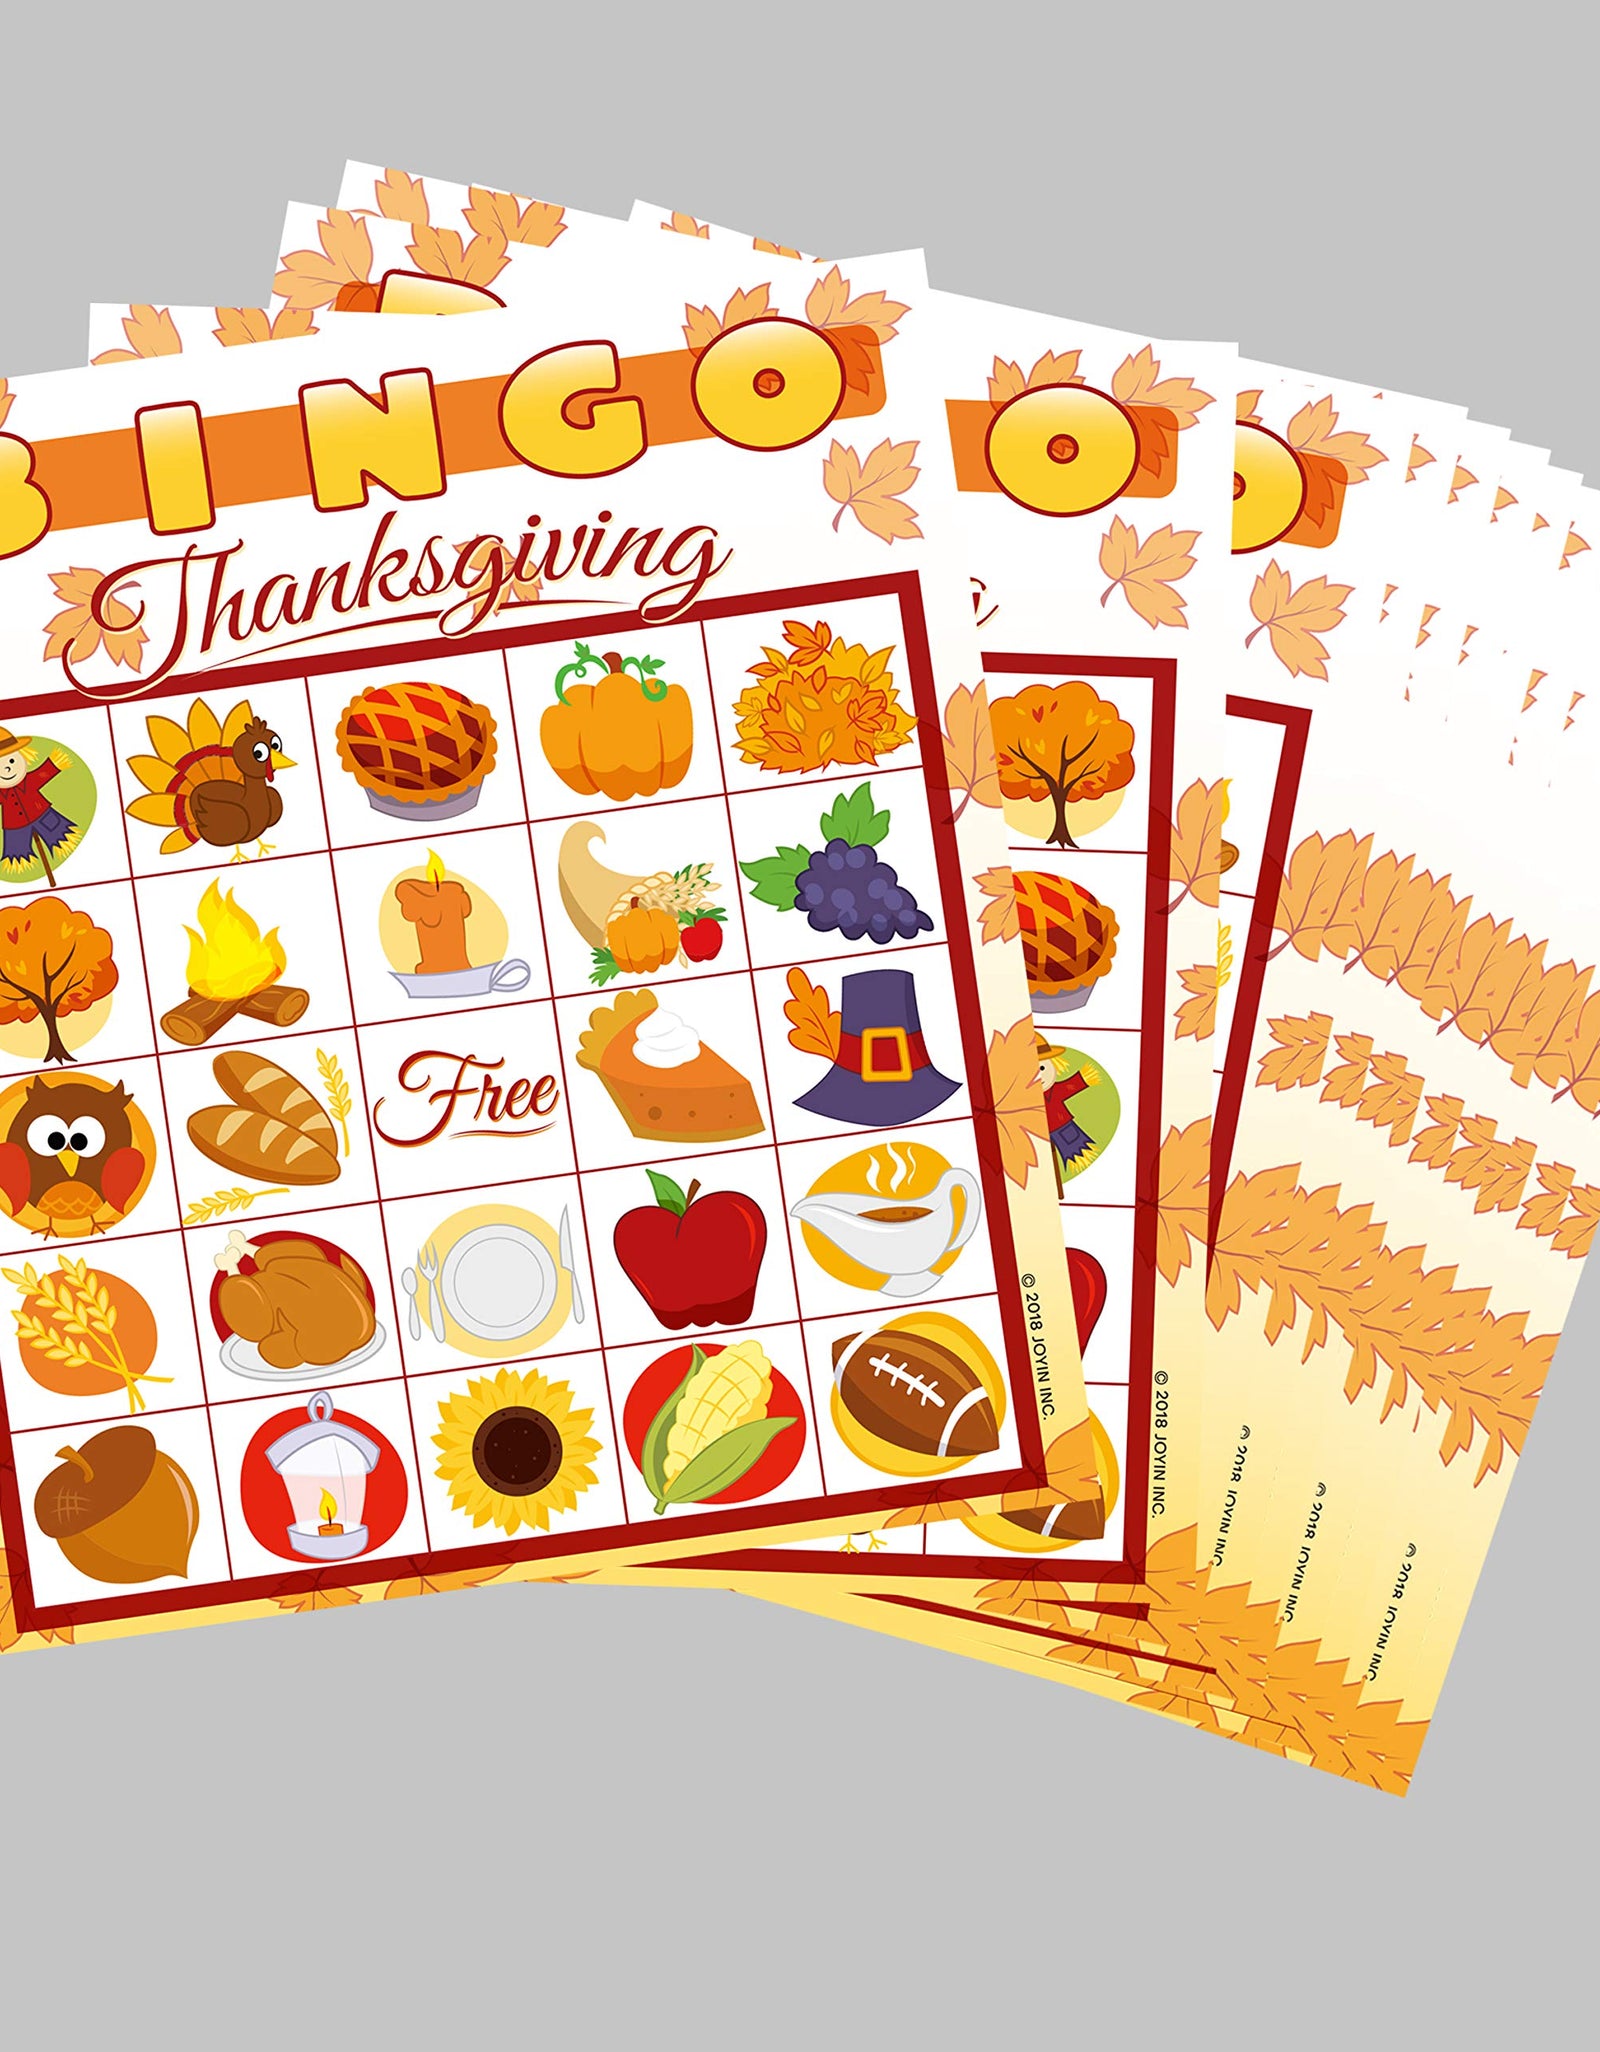 28 Players Thanksgiving Bingo Cards (5x5) for Kids Family Activities, Party Card Games, School Classroom Games, Turkey Party Favors Supplies.